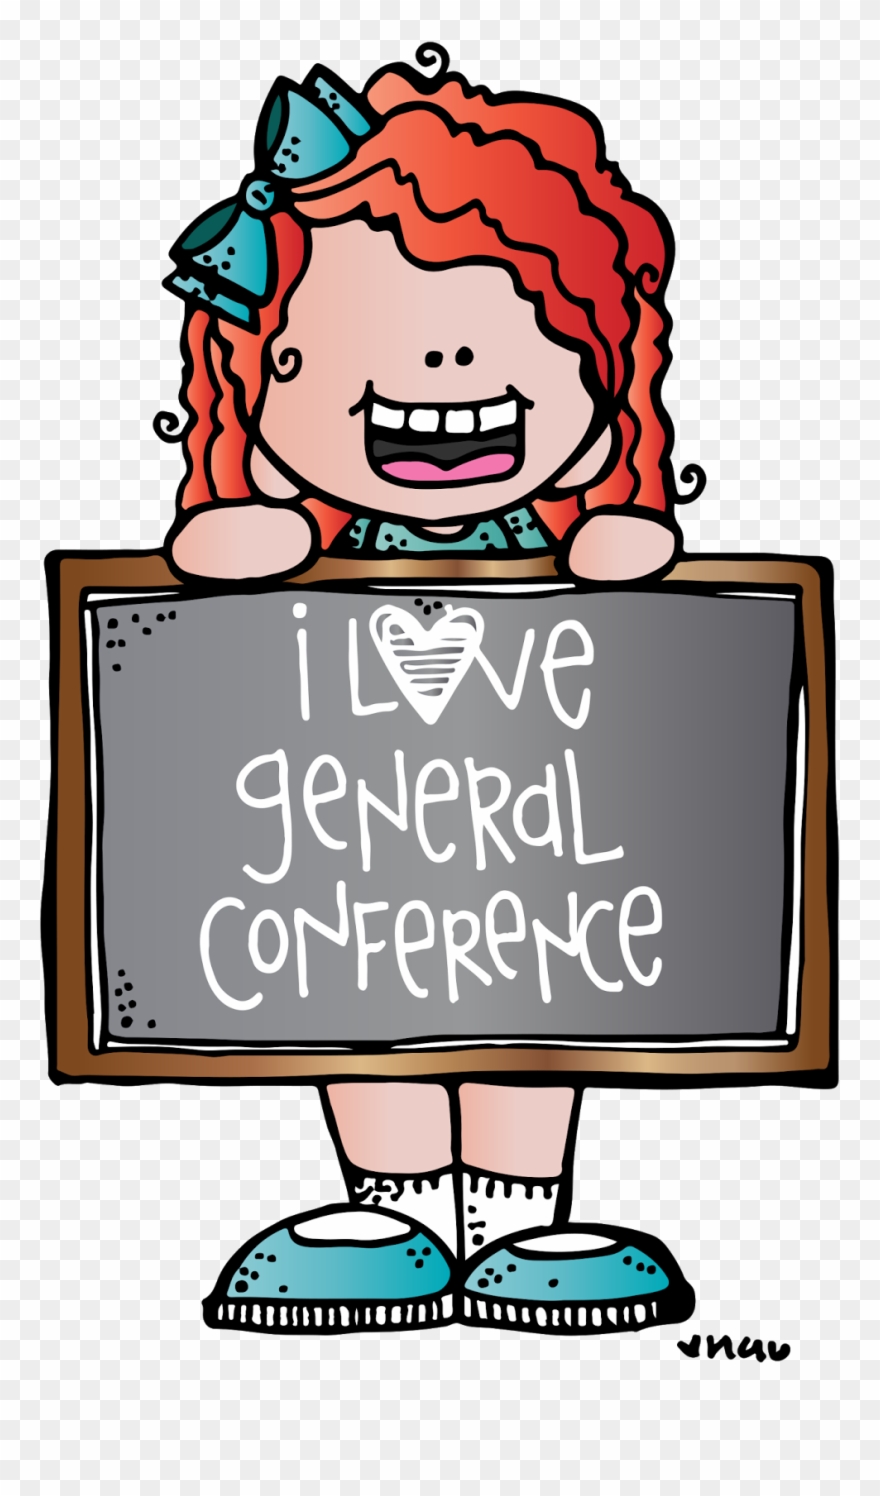 Download Free png Faith Clipart Conference Lds Free Clip Art General.